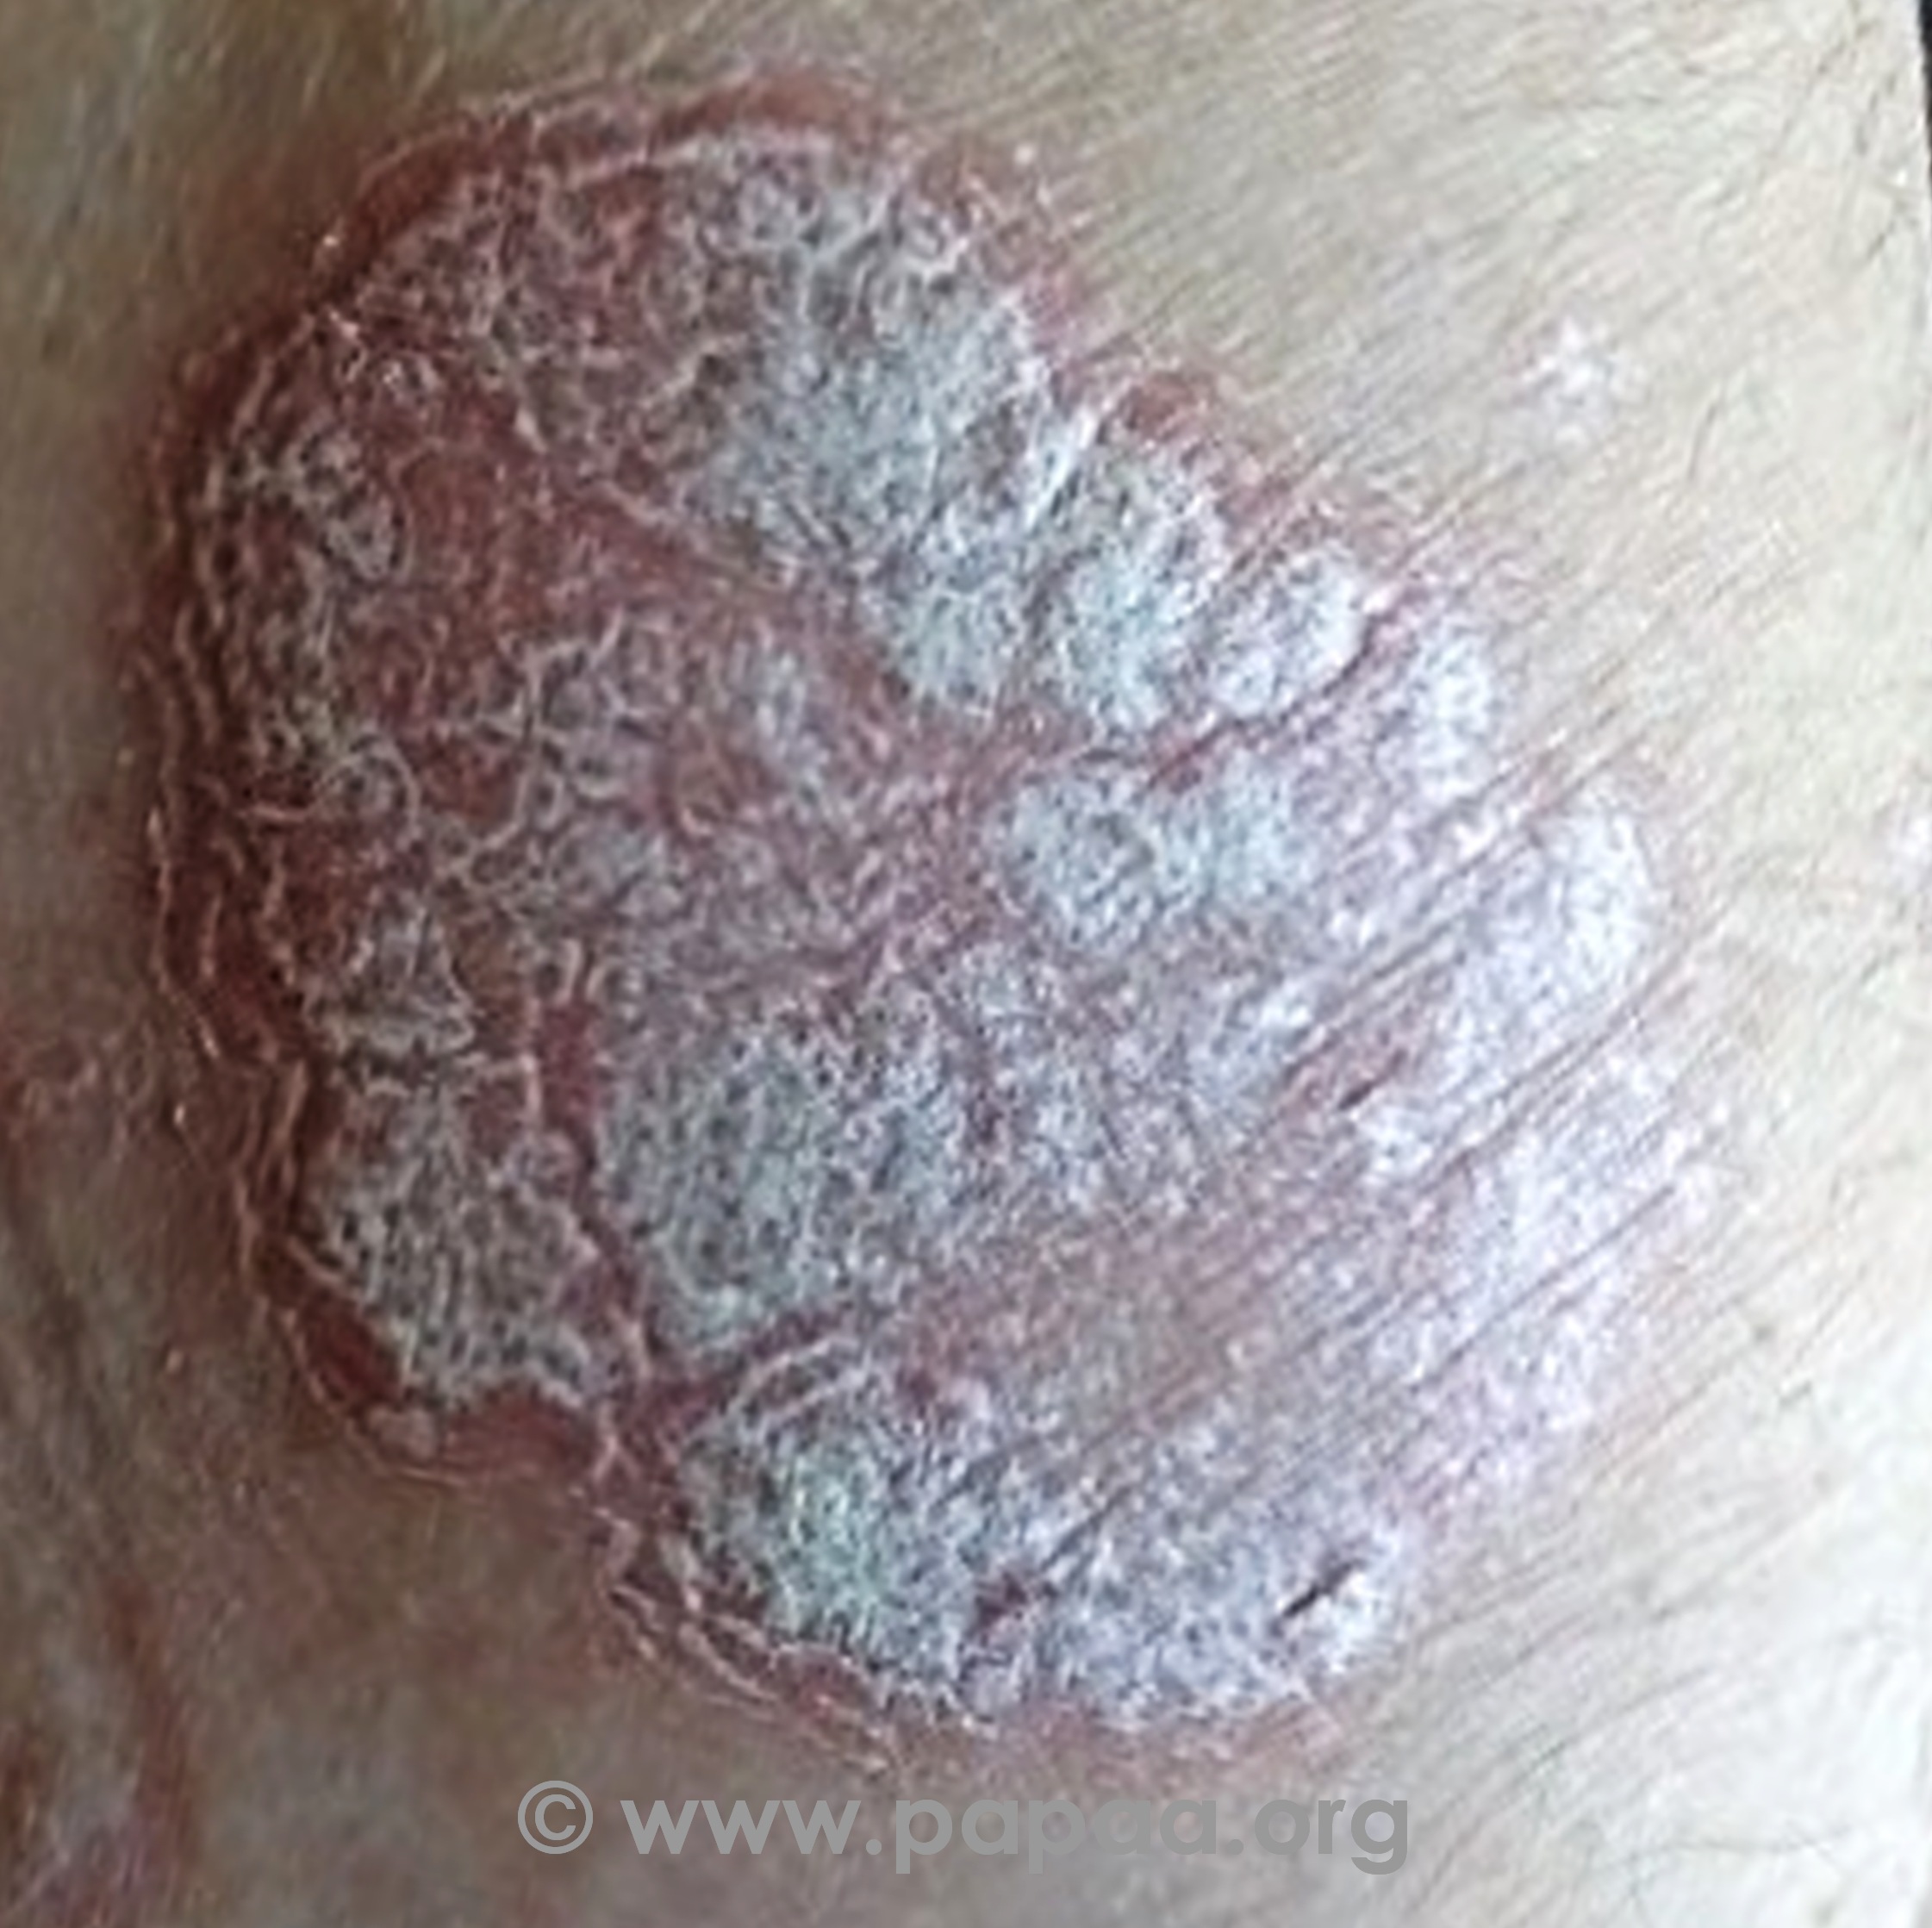 Types of psoriasis, who gets it, how they are affected and what to expect.